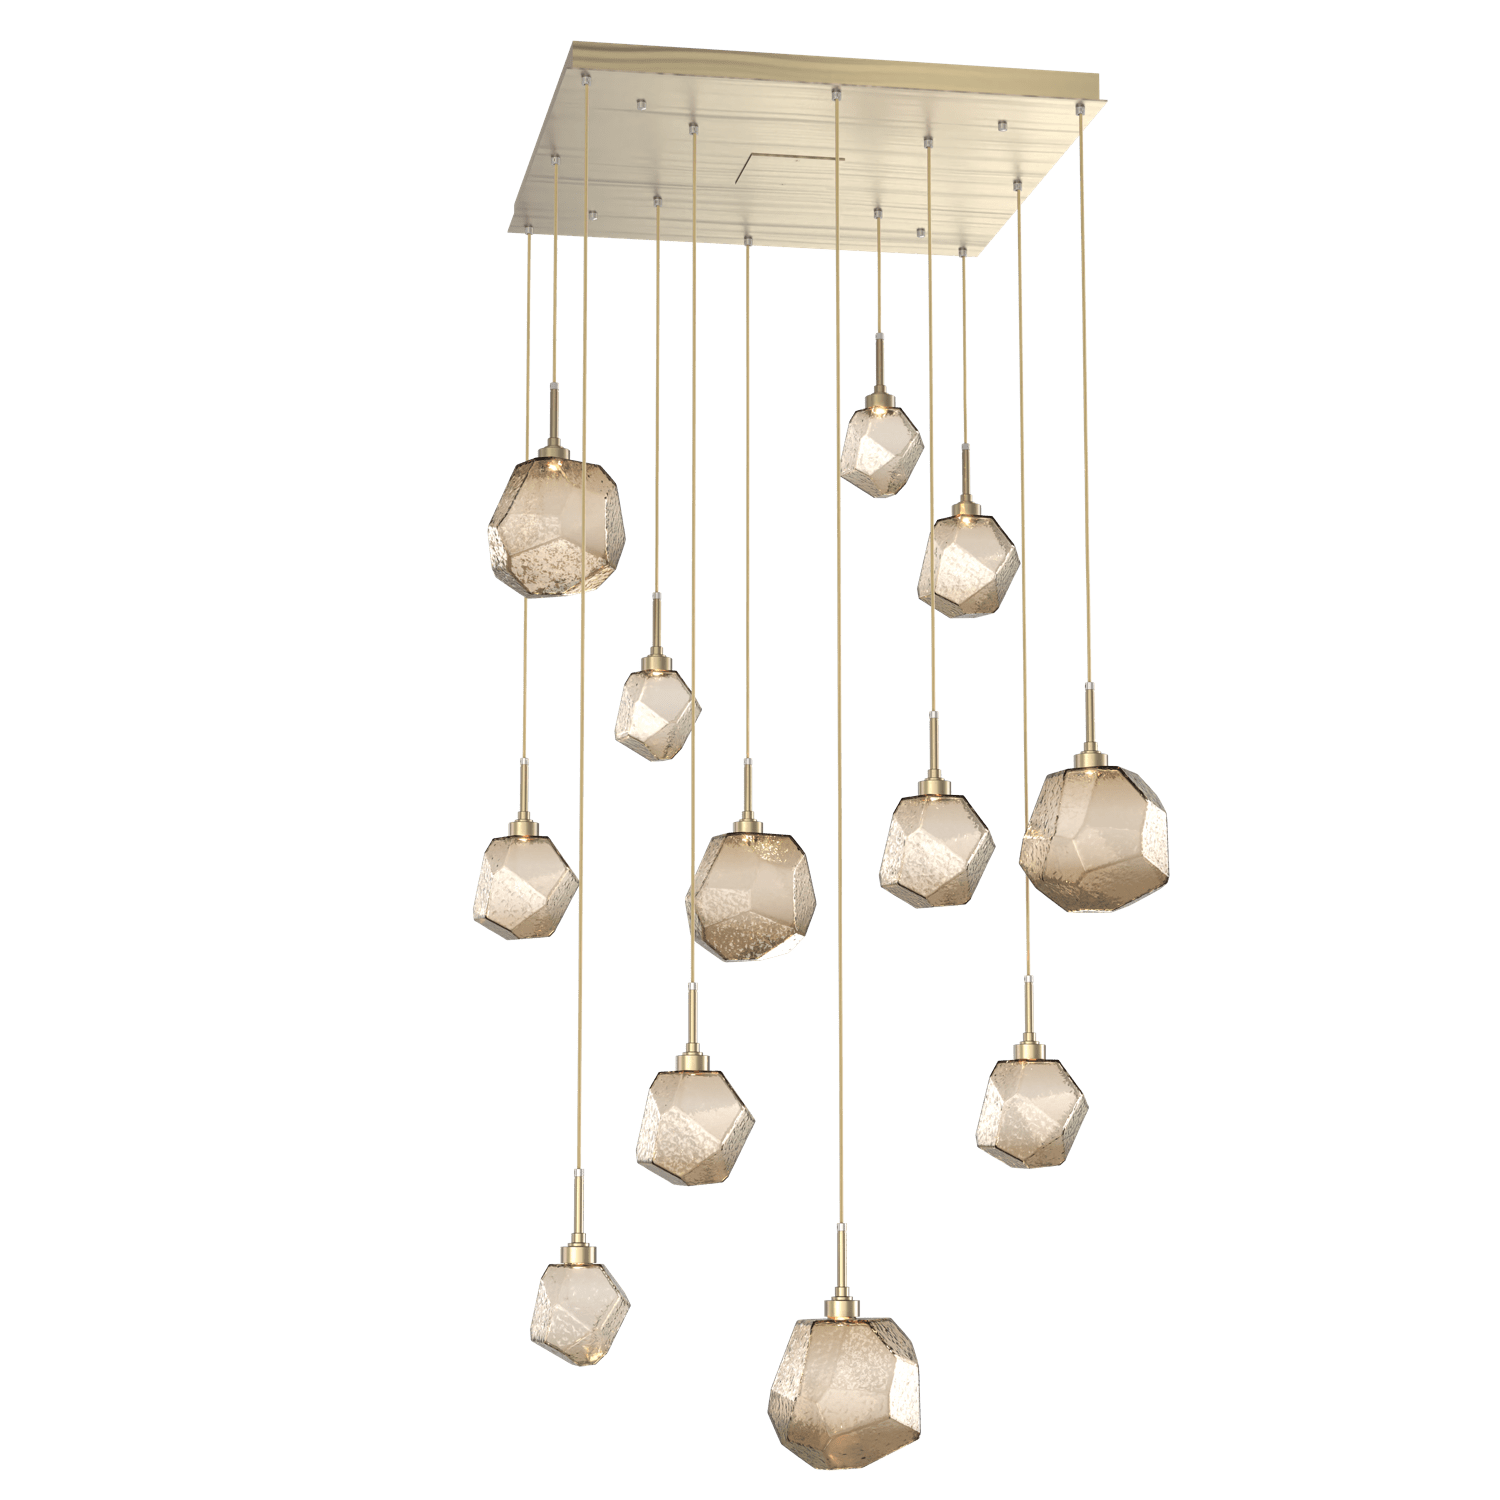 CHB0039-12-HB-B-Hammerton-Studio-Gem-12-light-square-pendant-chandelier-with-heritage-brass-finish-and-bronze-blown-glass-shades-and-LED-lamping